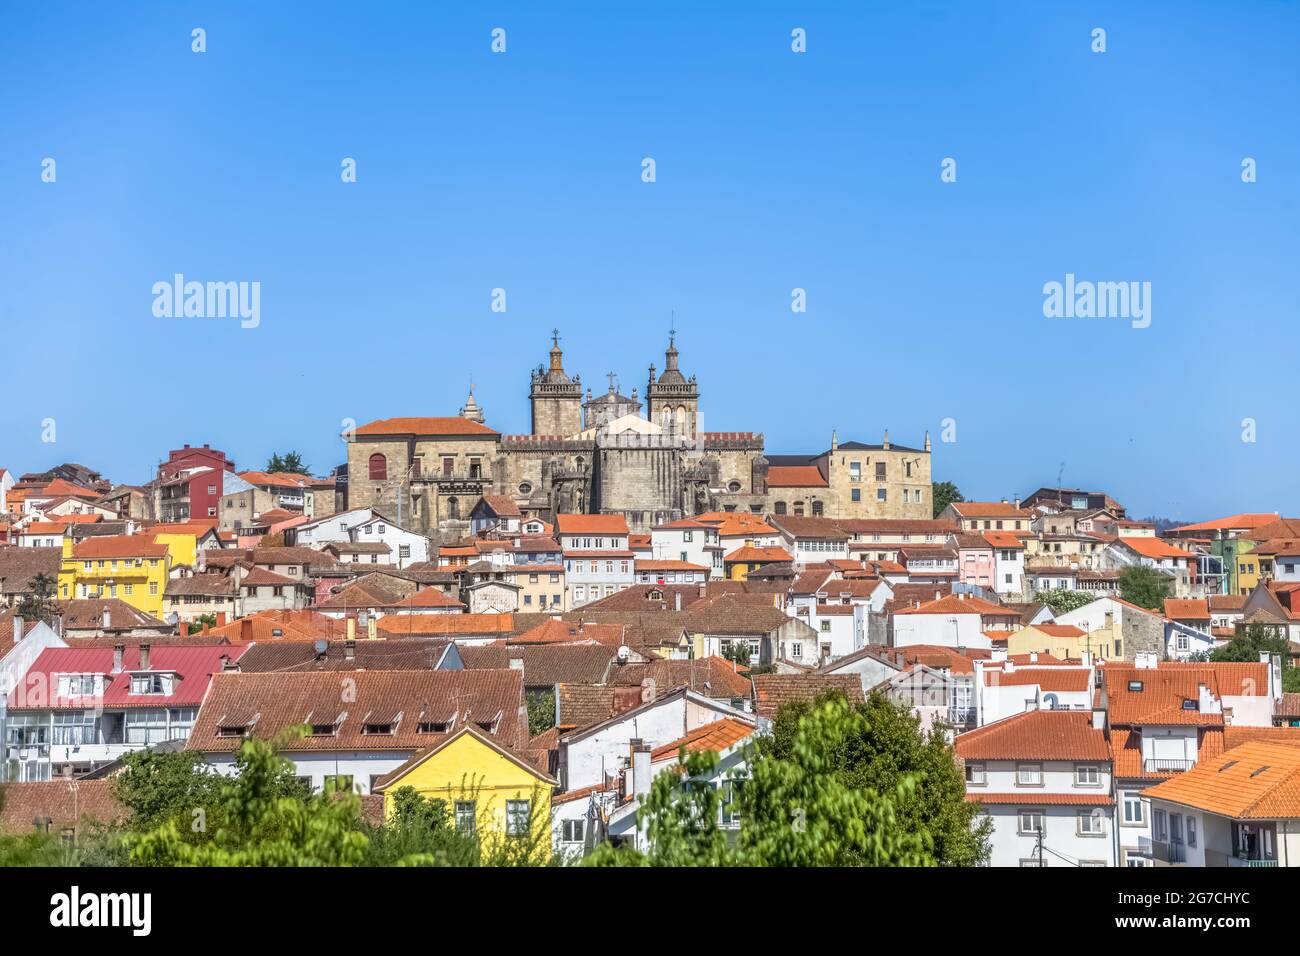 Viseu / Portugal - 05/08/2021 : View at the Viseu city, with Cathedral of Viseu on top, Se Cathedral de Viseu, architectural icons of the city Stock Photo